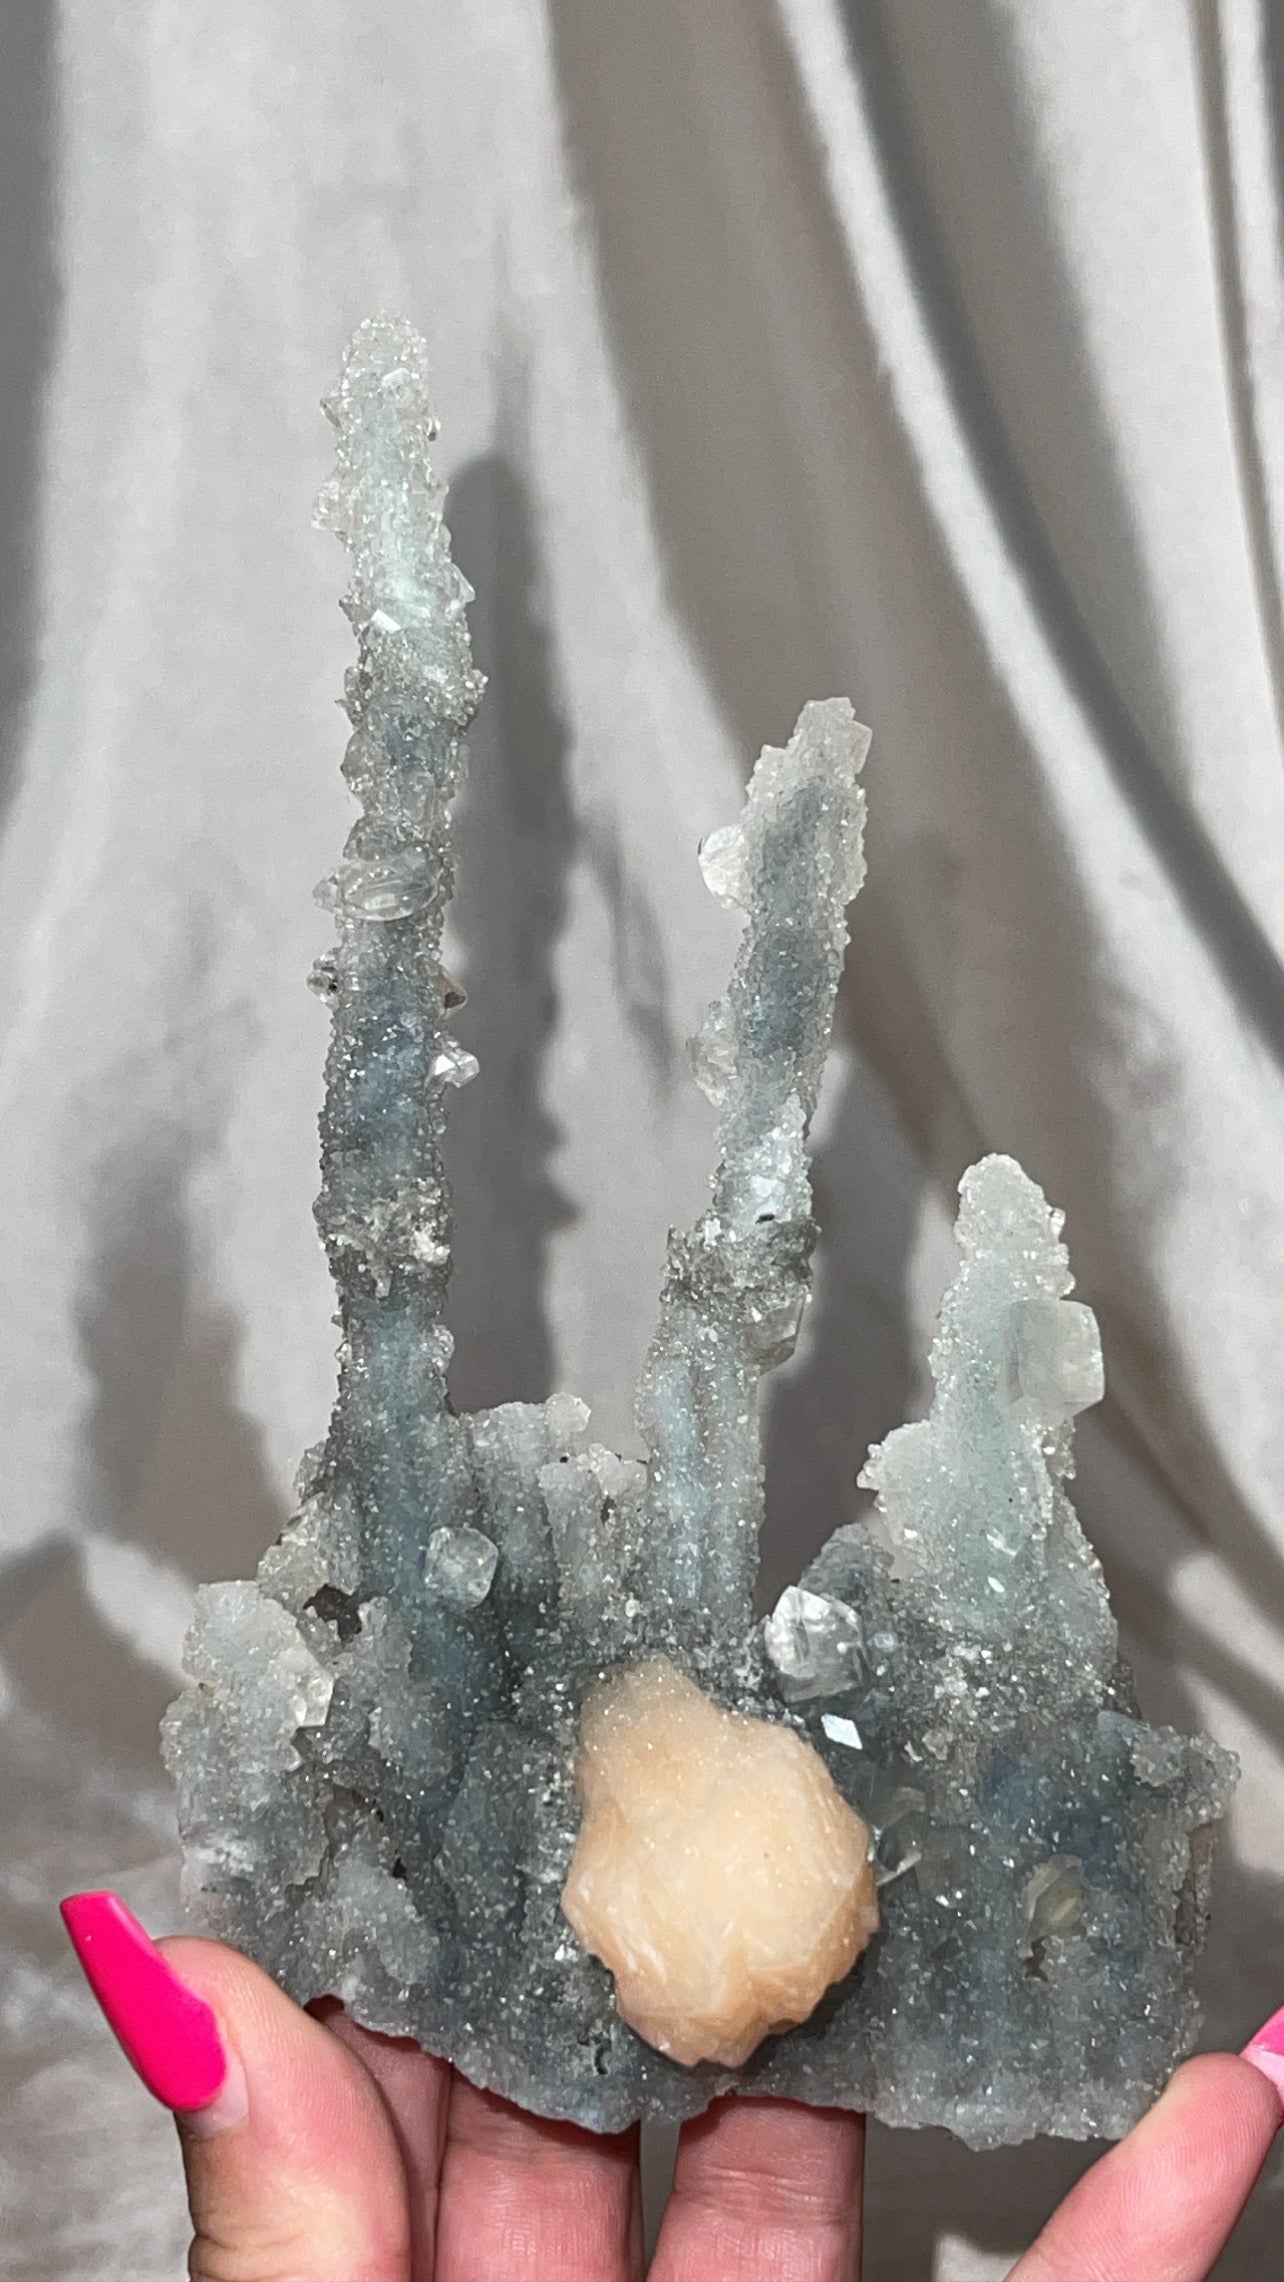 RARE Blueish Black Druzy Chalcedony Large Stalachtite cluster with Stilbite Flower and Apophyllite crystals